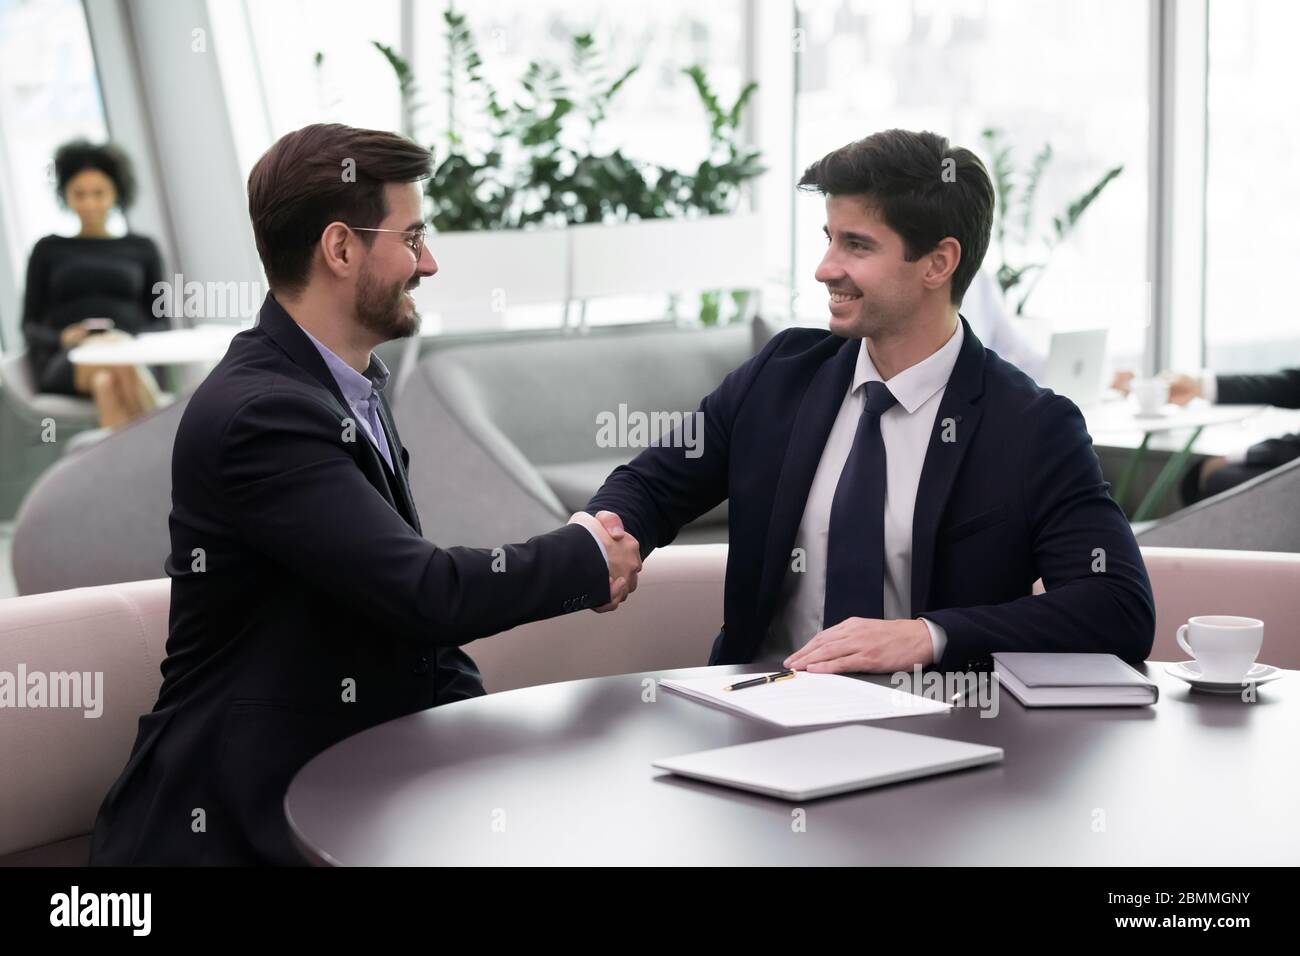 Two businessmen accomplish successful negotiations shaking hands Stock Photo